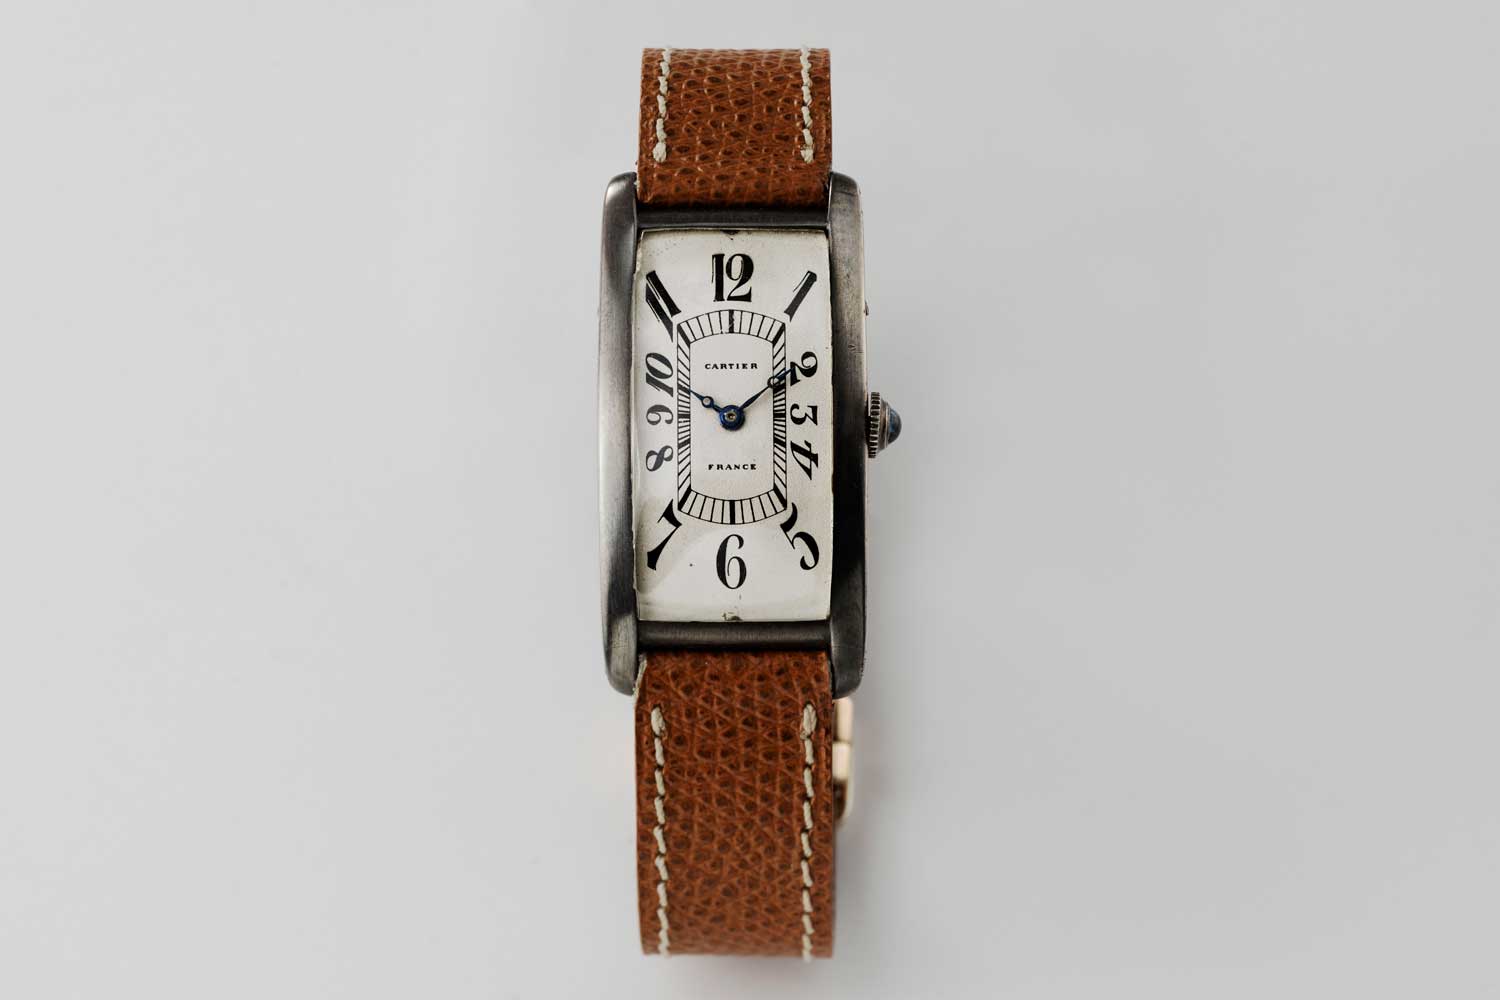 1926 made in France Cartier Tank Cintrée, possibly pièce unique with a silver case and elongated Arabic numerals; powered by a European Watch movement; this particular piece is from the private collection of Auro Montanari (©Revolution)